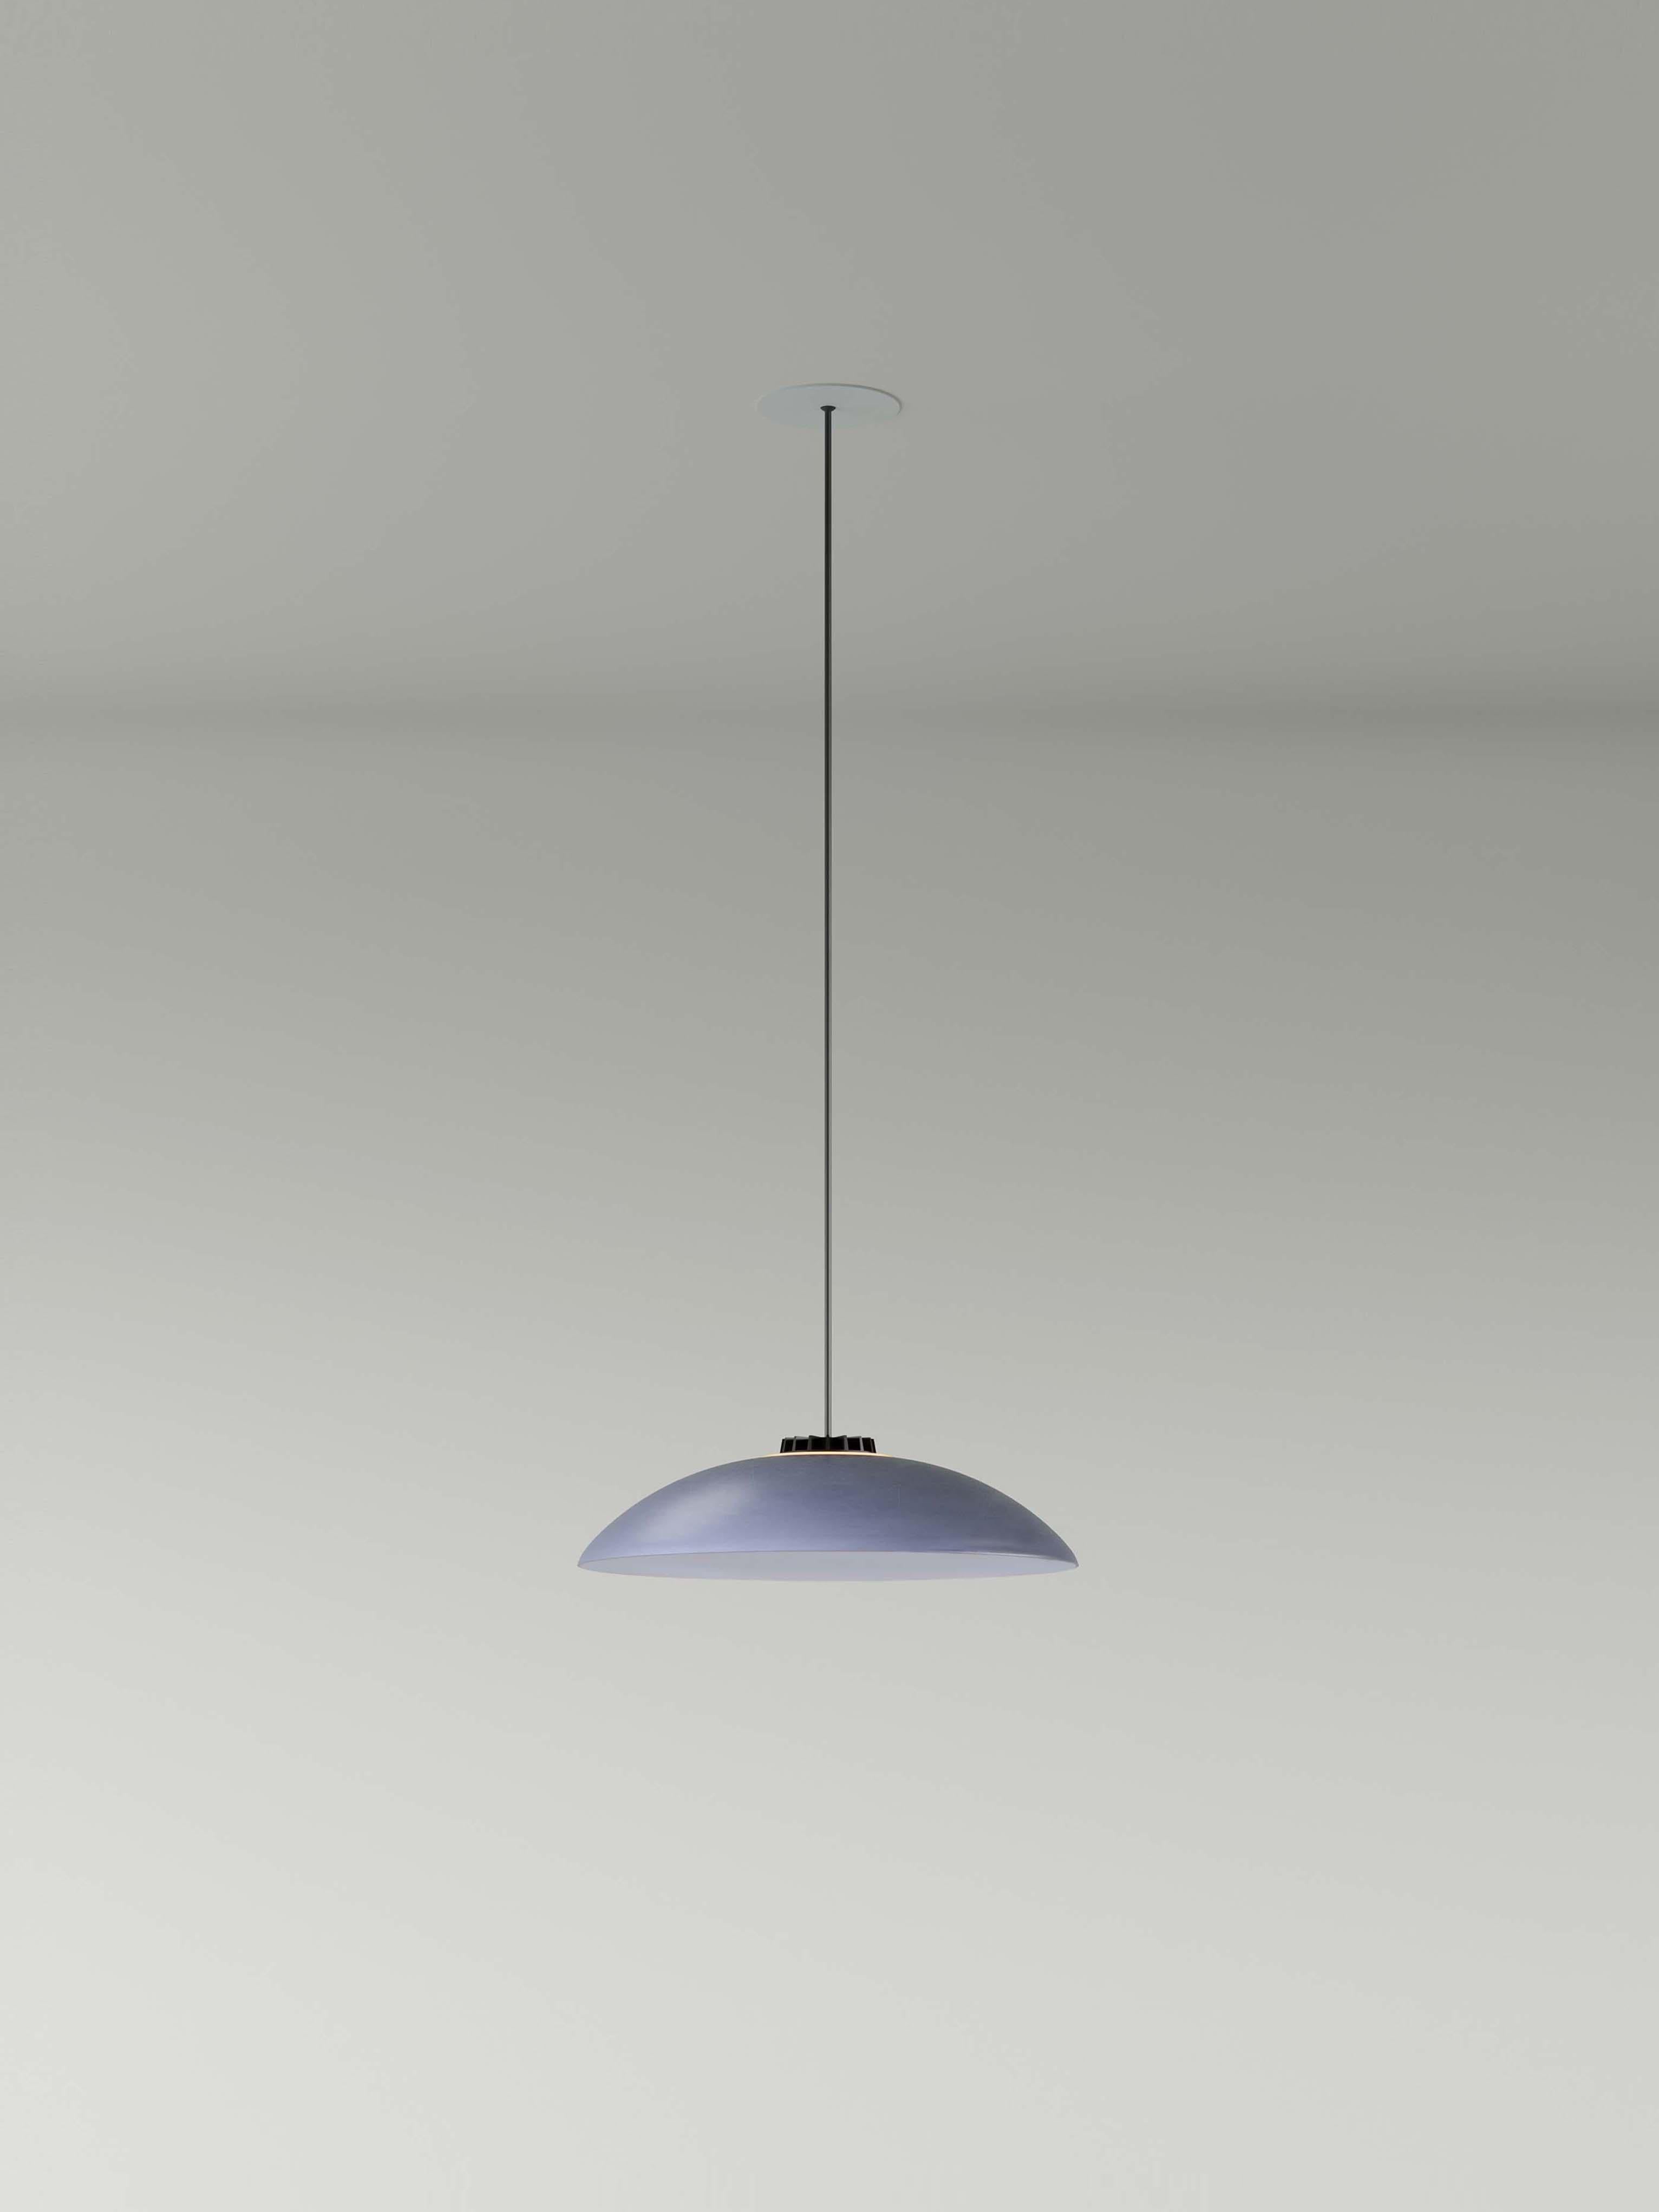 Small blue headhat plate pendant lamp by Santa & Cole
Dimensions: D 35 x H 9 cm
Materials: Metal.
Cable lenght: 3mts.
Available in other colors and sizes. Available in 2 cable lengths: 3mts, 8mts.
Availalble in 2 canopy colors: black or